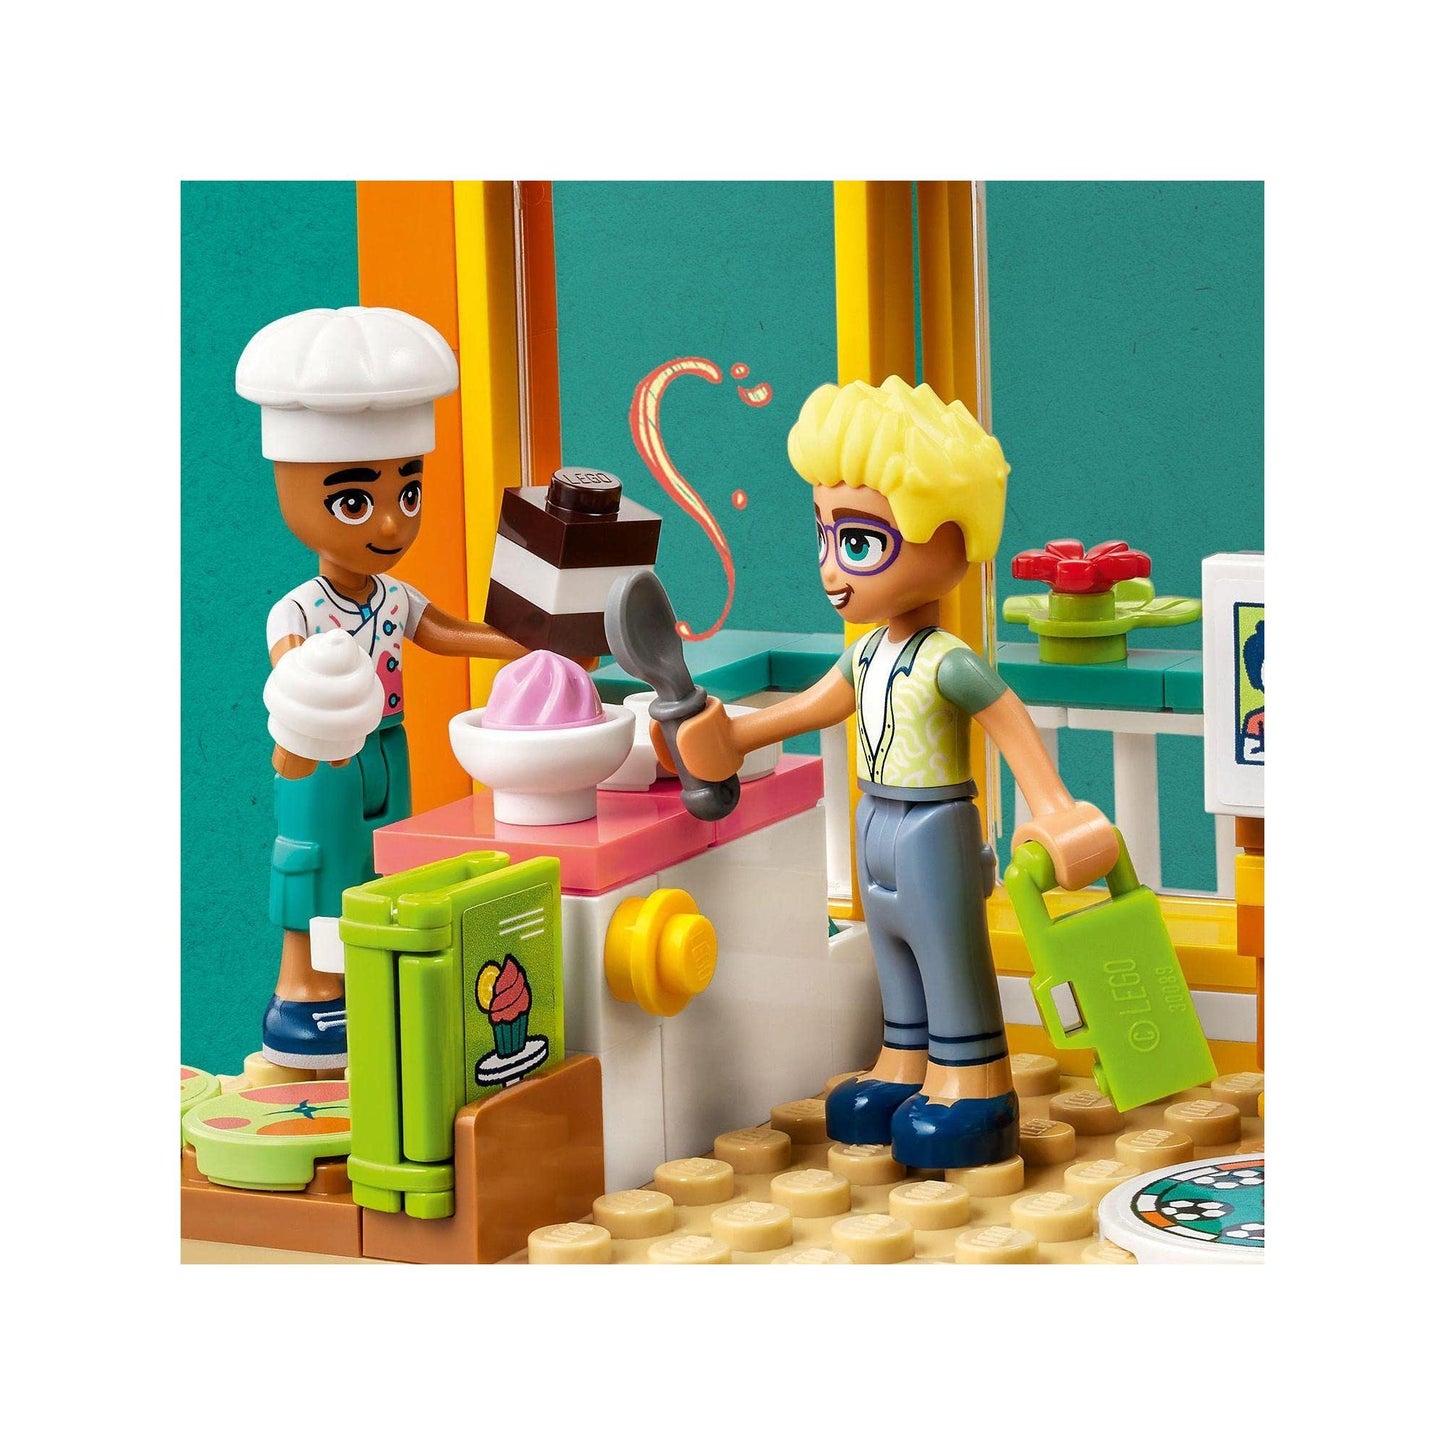 LEGO® Friends Leo's Room 41754 Building Toy